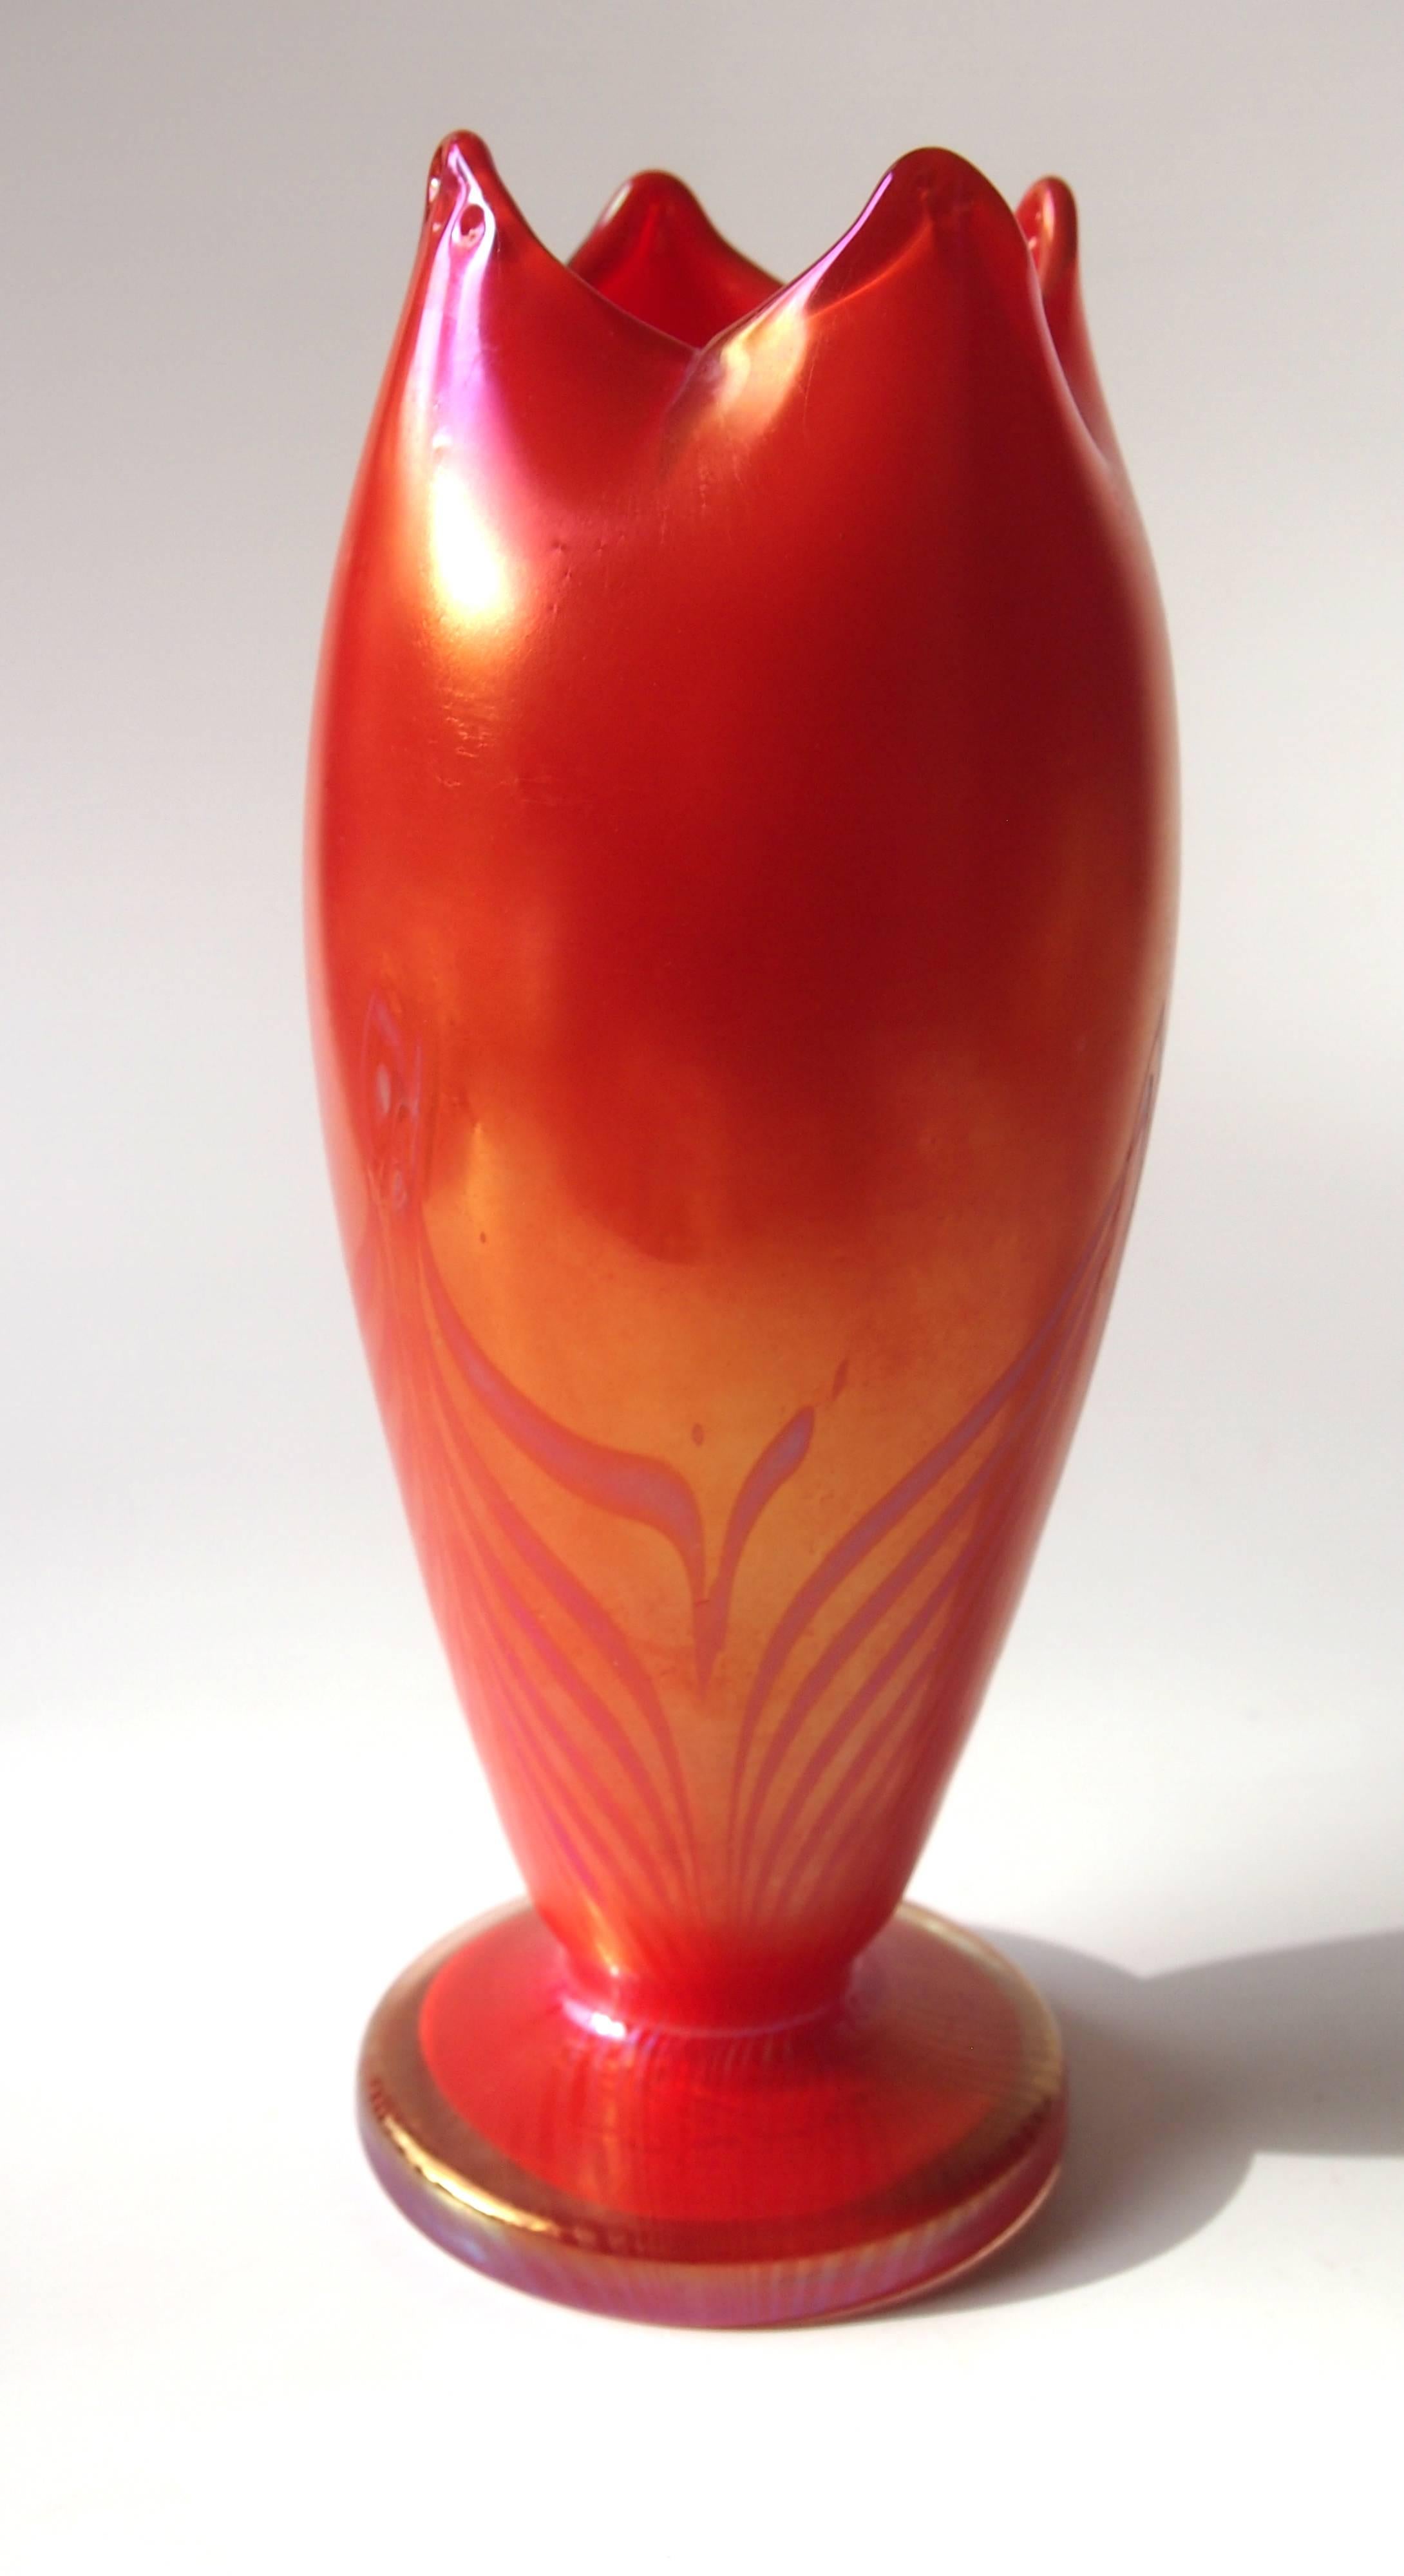 Czech Bohemian Art Nouveau Kralik Red Pulled and Feathered Glass Vase